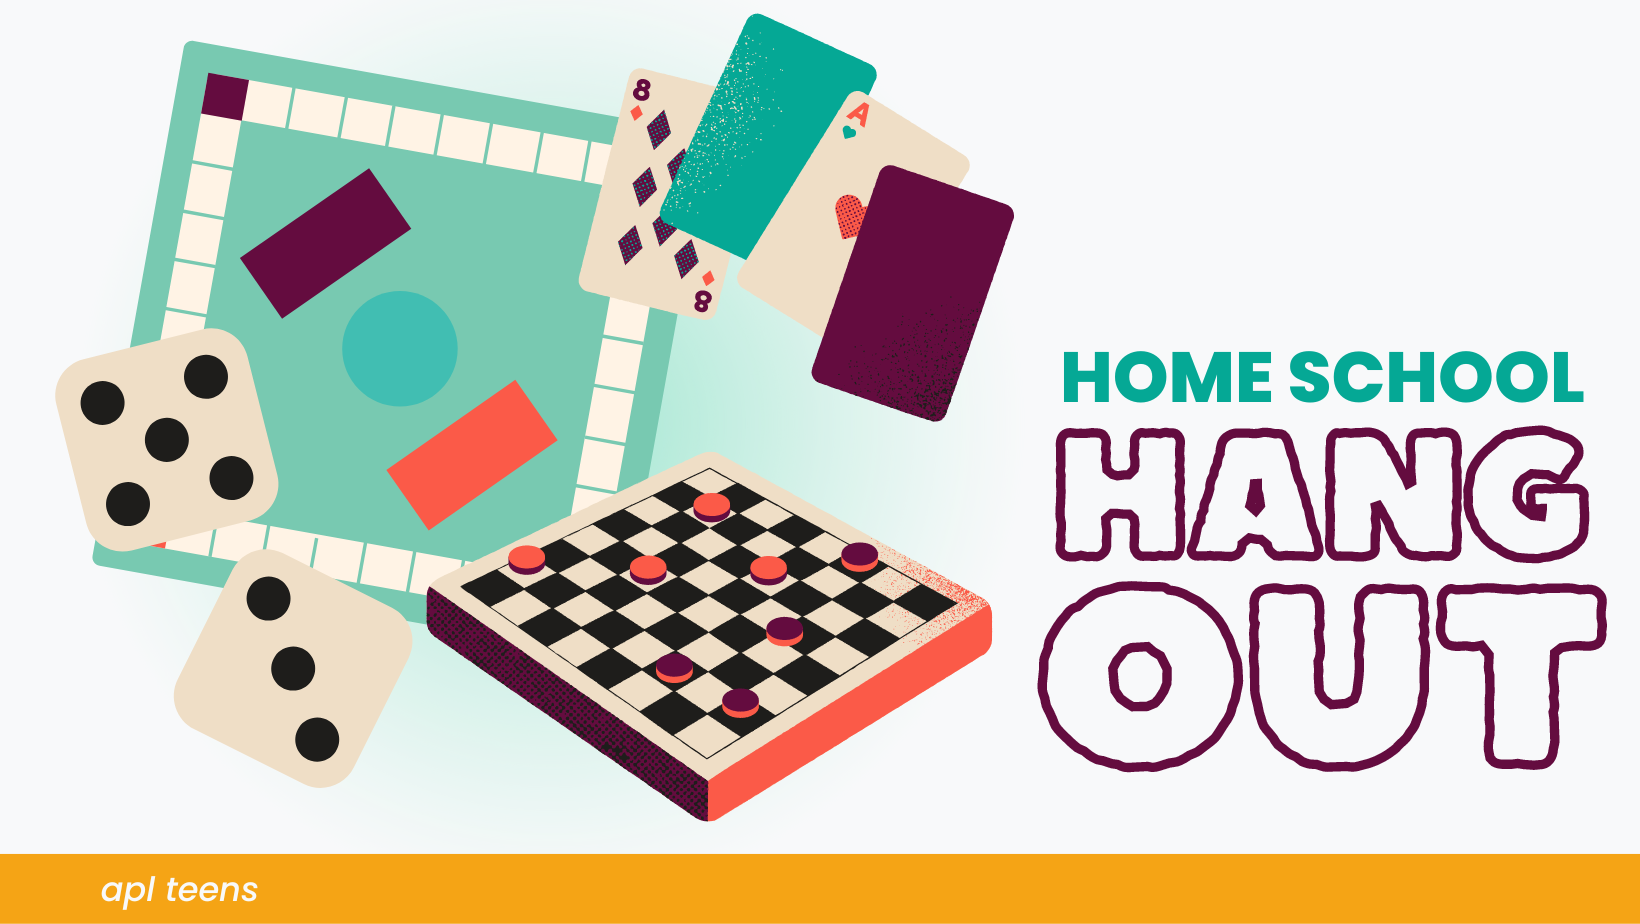 Drawings of board games with text to the side that reads "HOME SCHOOL HANG OUT."